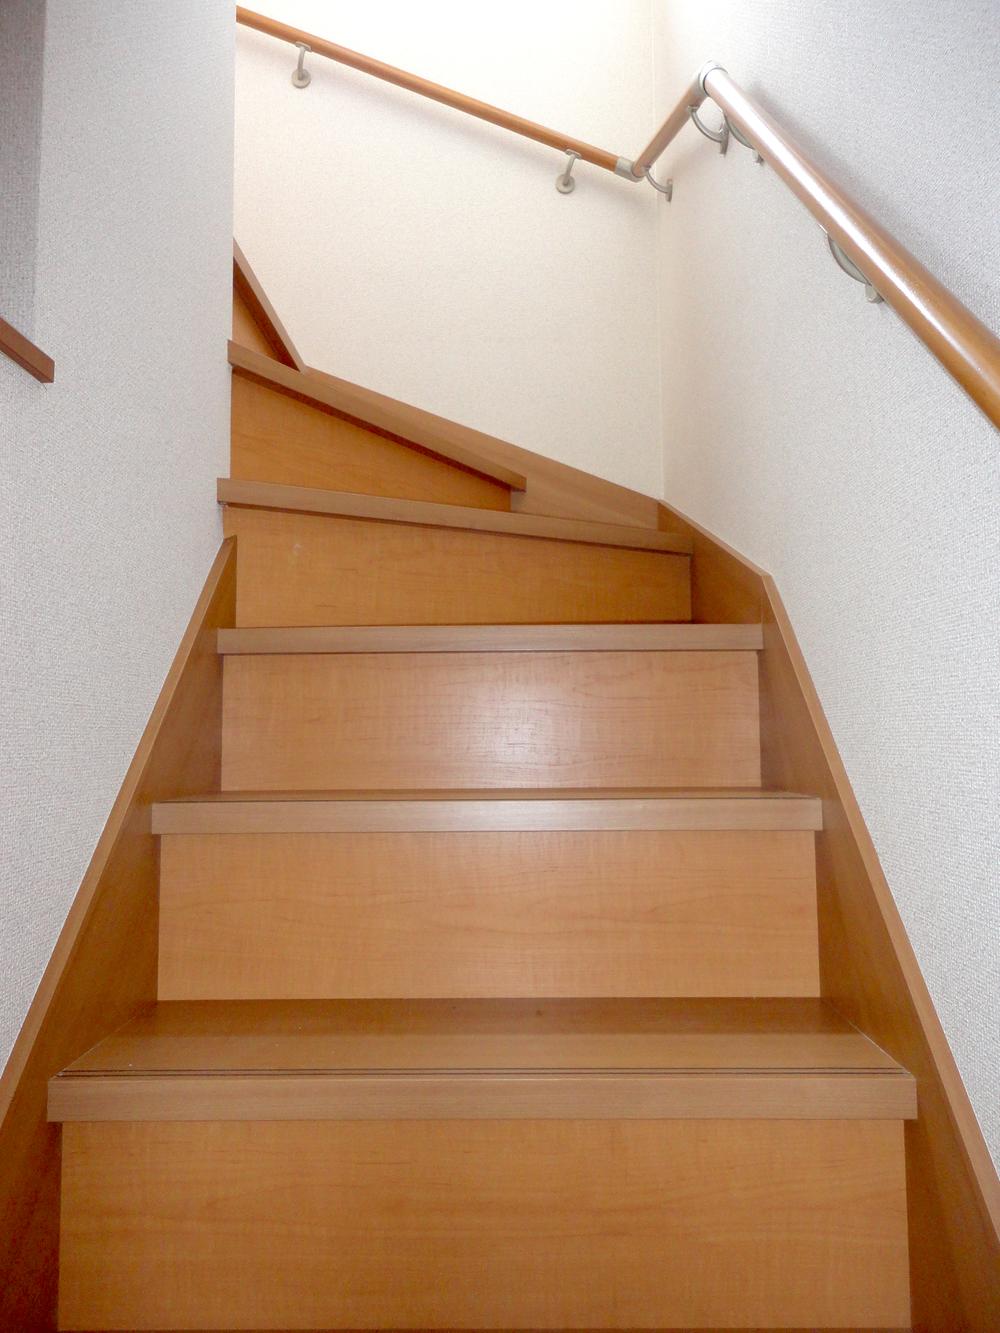 Same specifications photos (Other introspection). Staircase (same specifications)